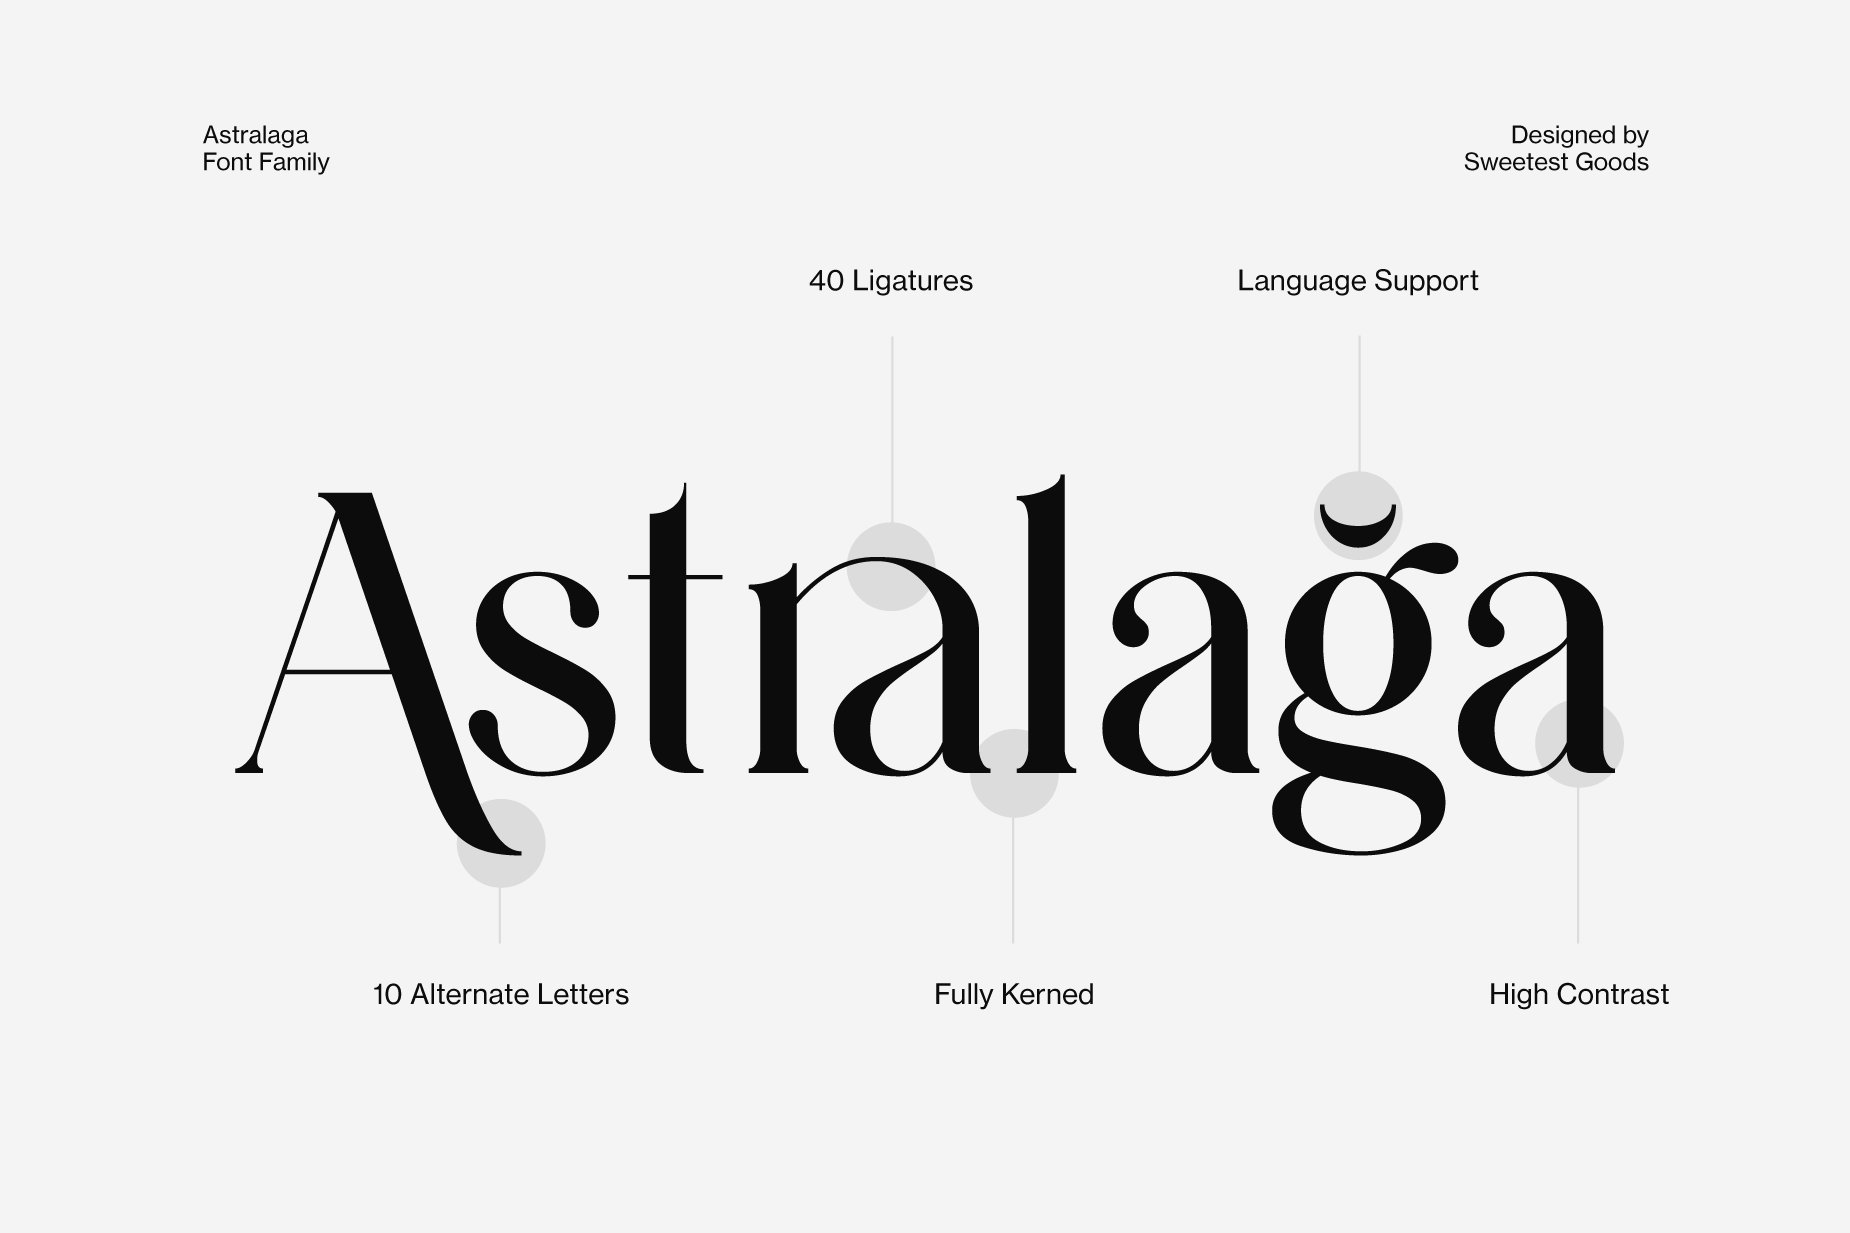 Typography Design - Astralaga Typeface Features - Alternate Letters, High Contrast, Ligatures, Language Support, Kerning